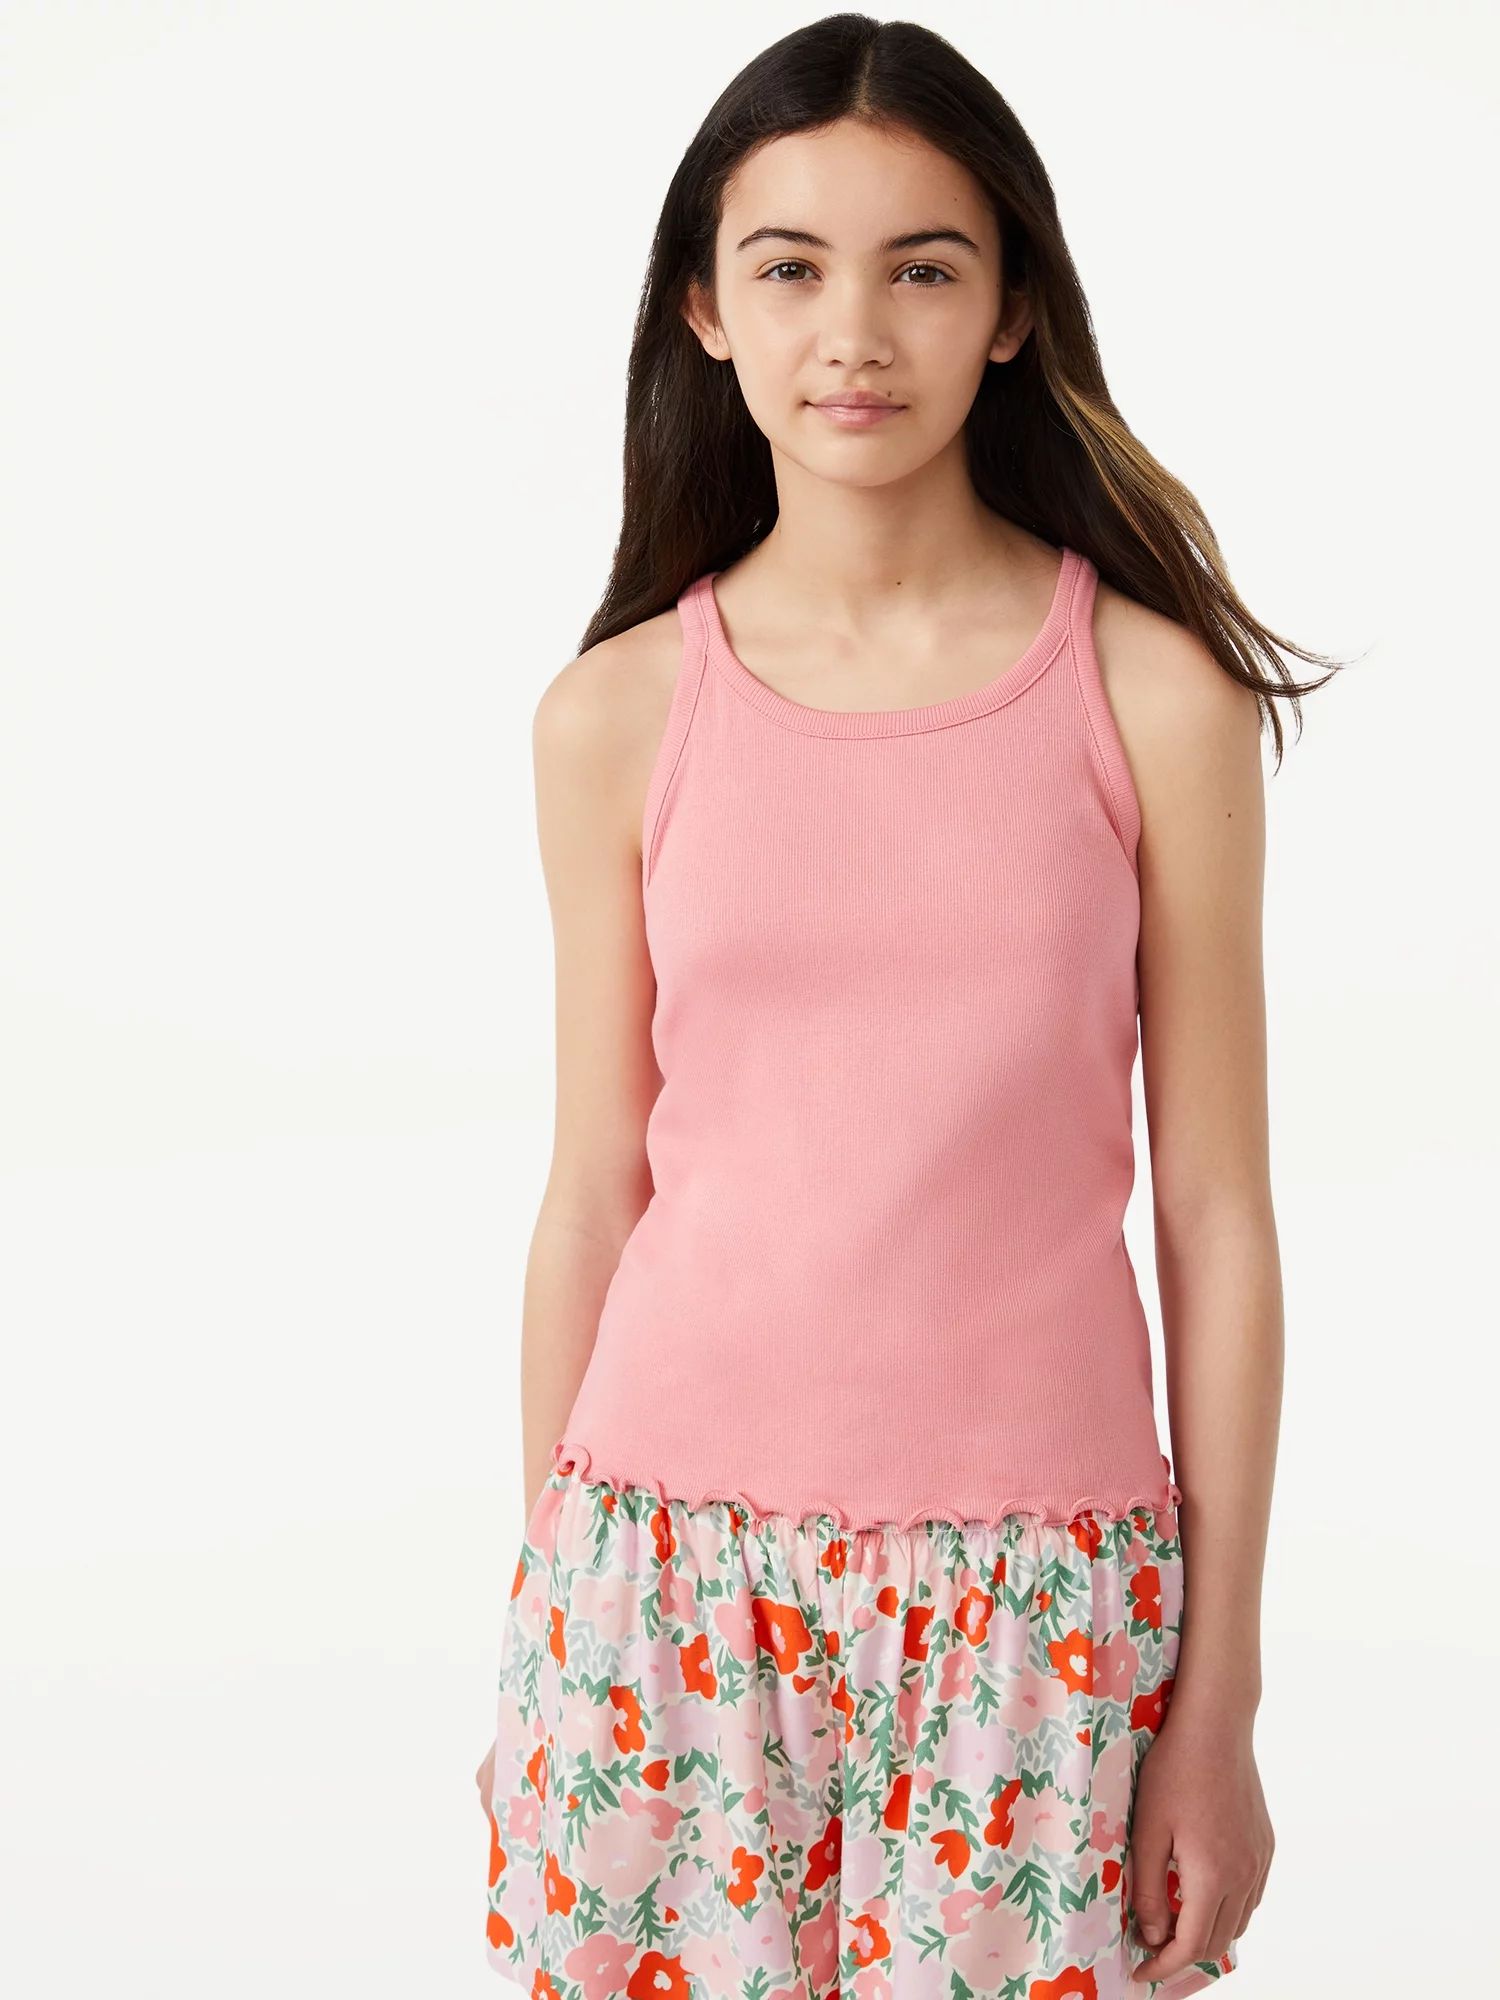 Free Assembly Girls Racerback Ribbed Tank Tops, 2-Pack, Sizes 4-18 & Plus | Walmart (US)